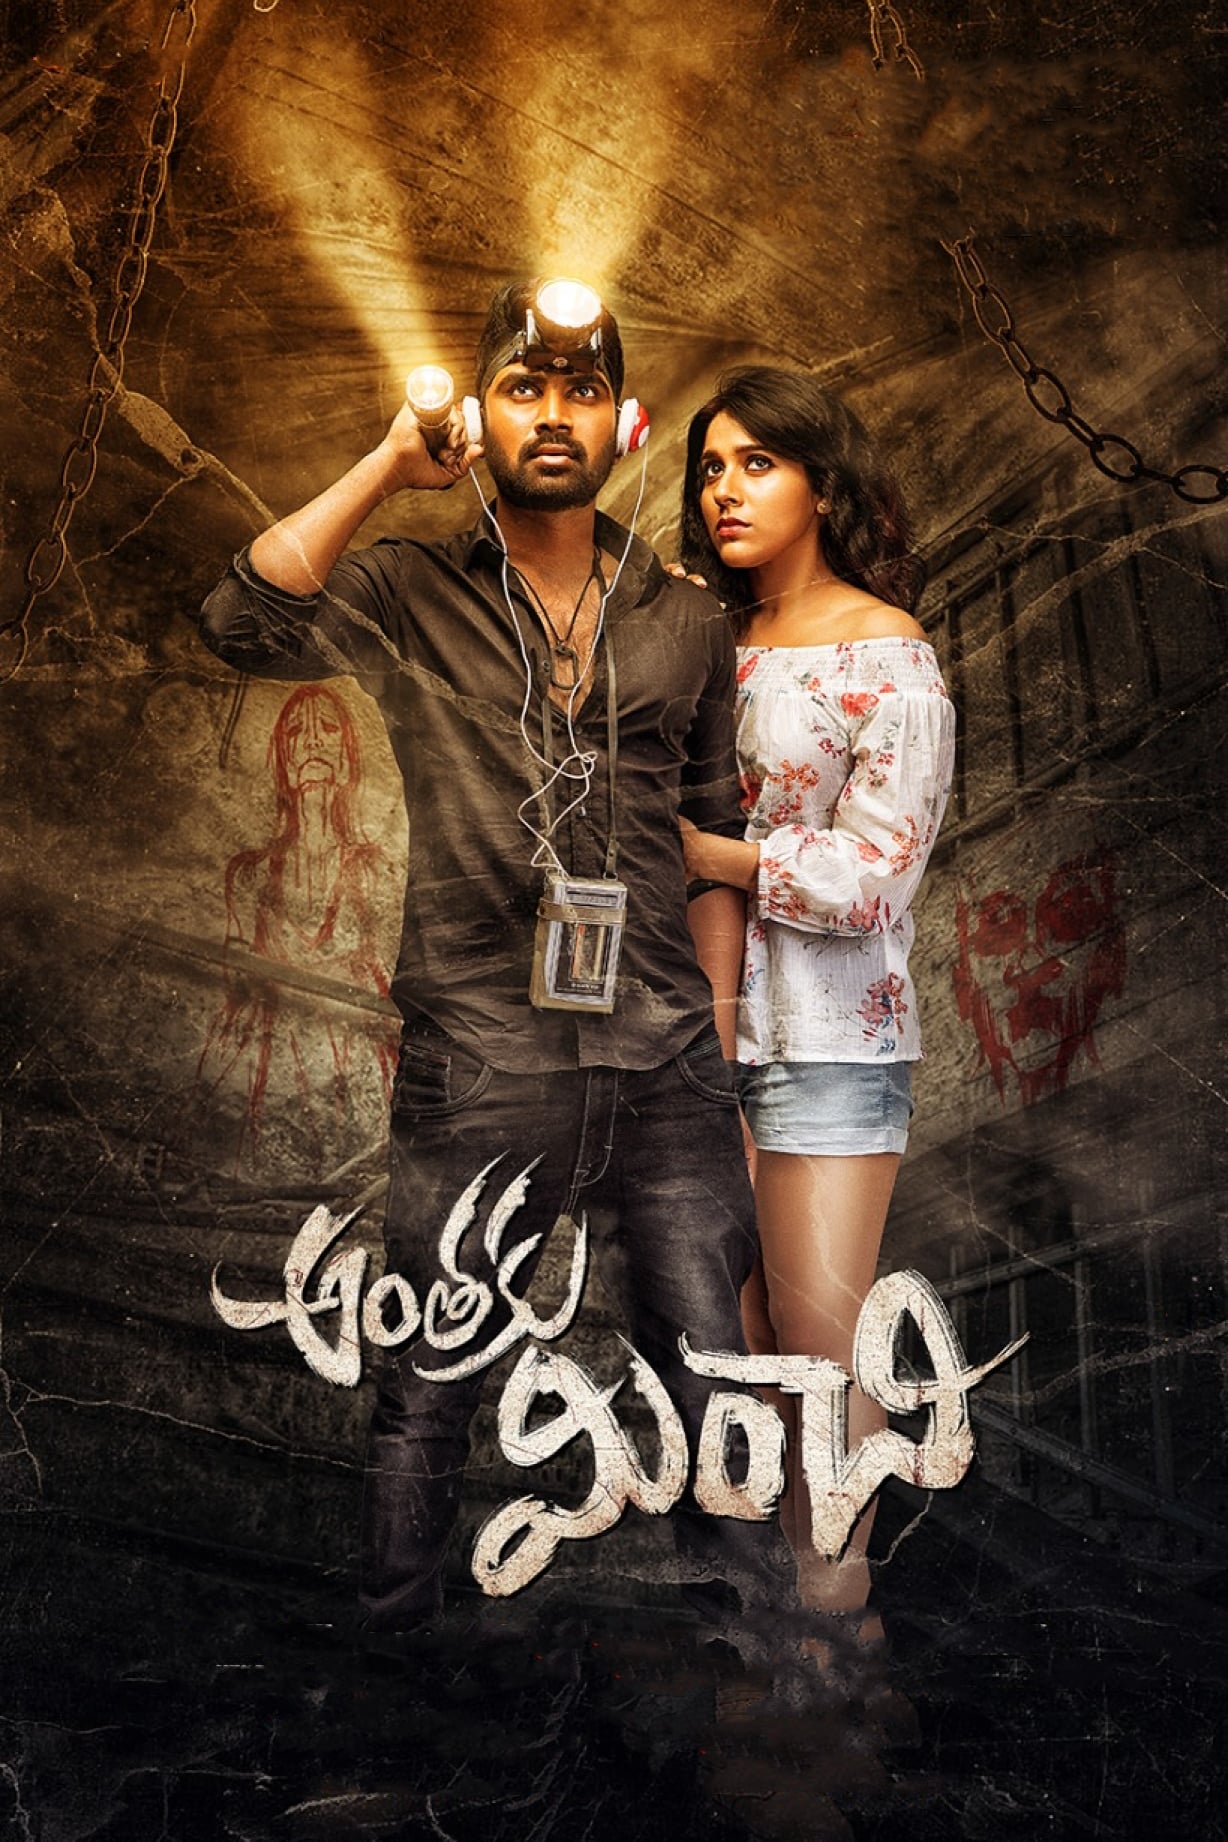 Poster for the movie "Anthaku Minchi"